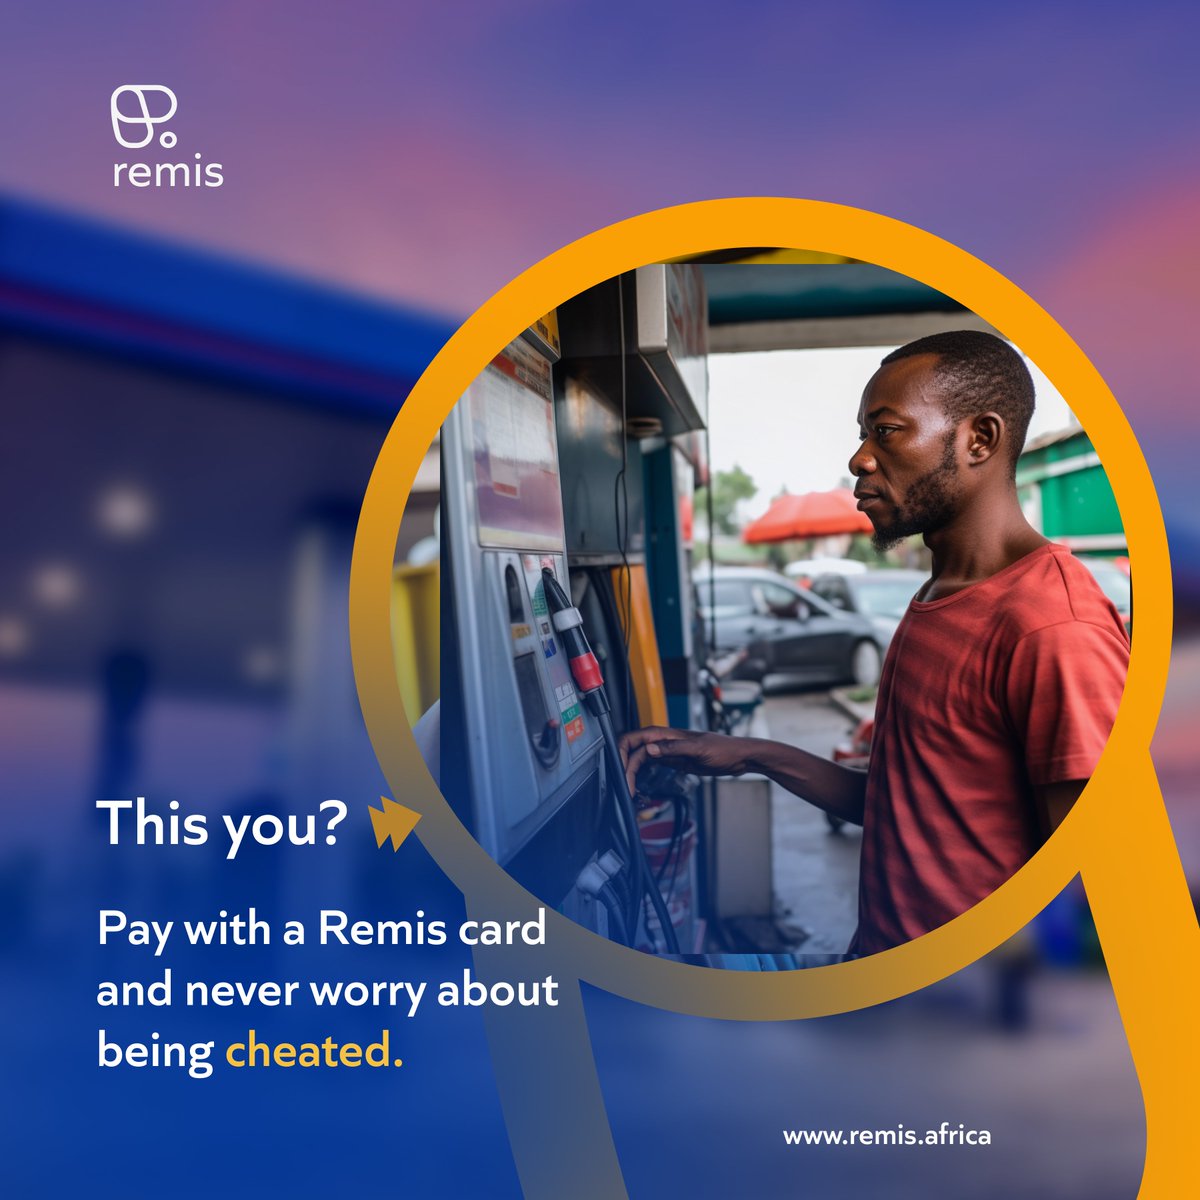 How intensely have you been looking at the fuel pump lately? Get a Remis fuel card and be at ease. You are guaranteed of getting the very last drop of fuel paid for.
Send us a message now or visit remis.africa to get on board.
#fuelsubsidy